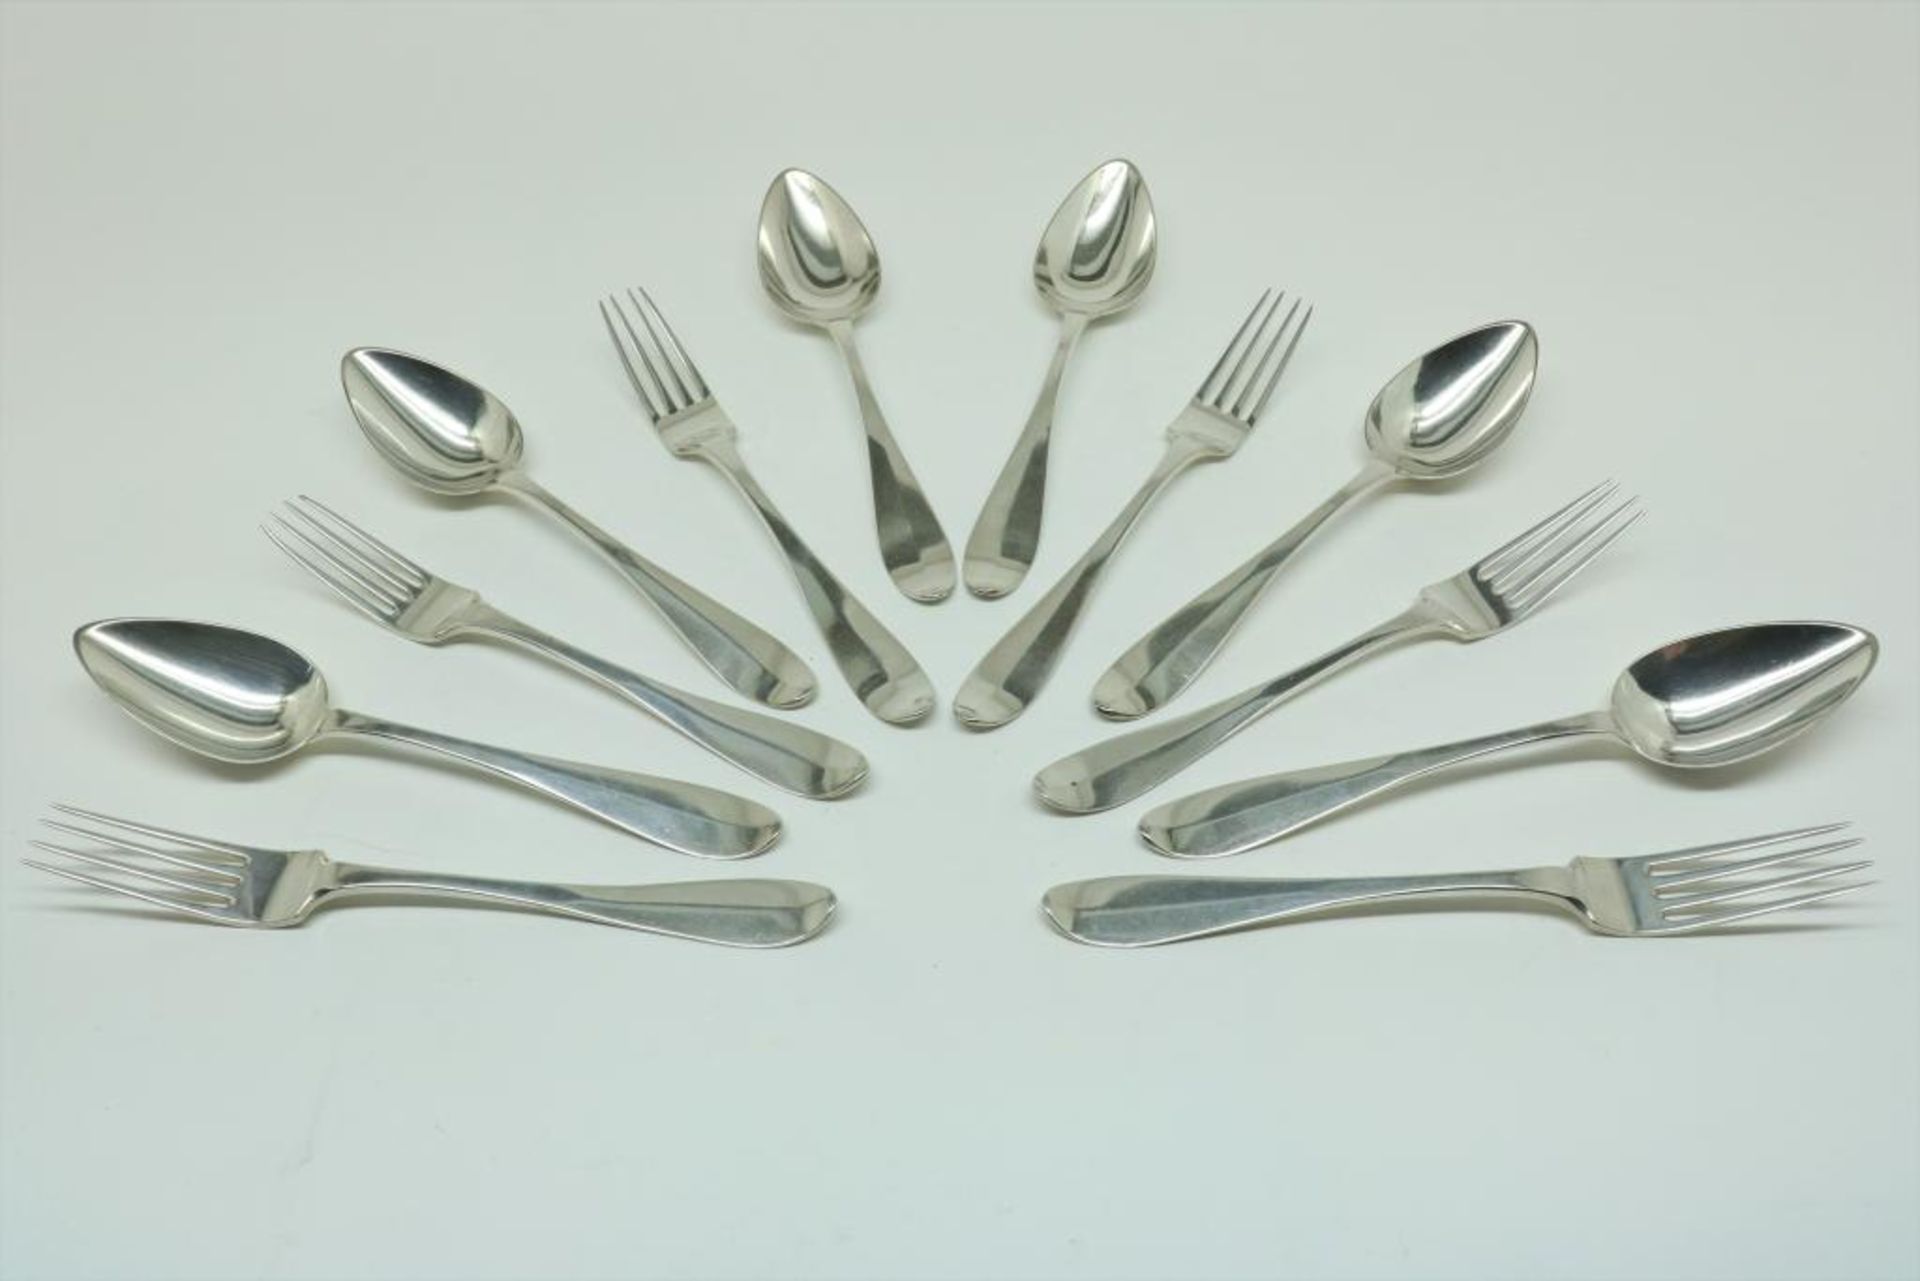 Six silver diner forks and spoons, Dutch, mm G.J. Grebe jr, Rotterdam, dl 1856, 835/000, gross w.